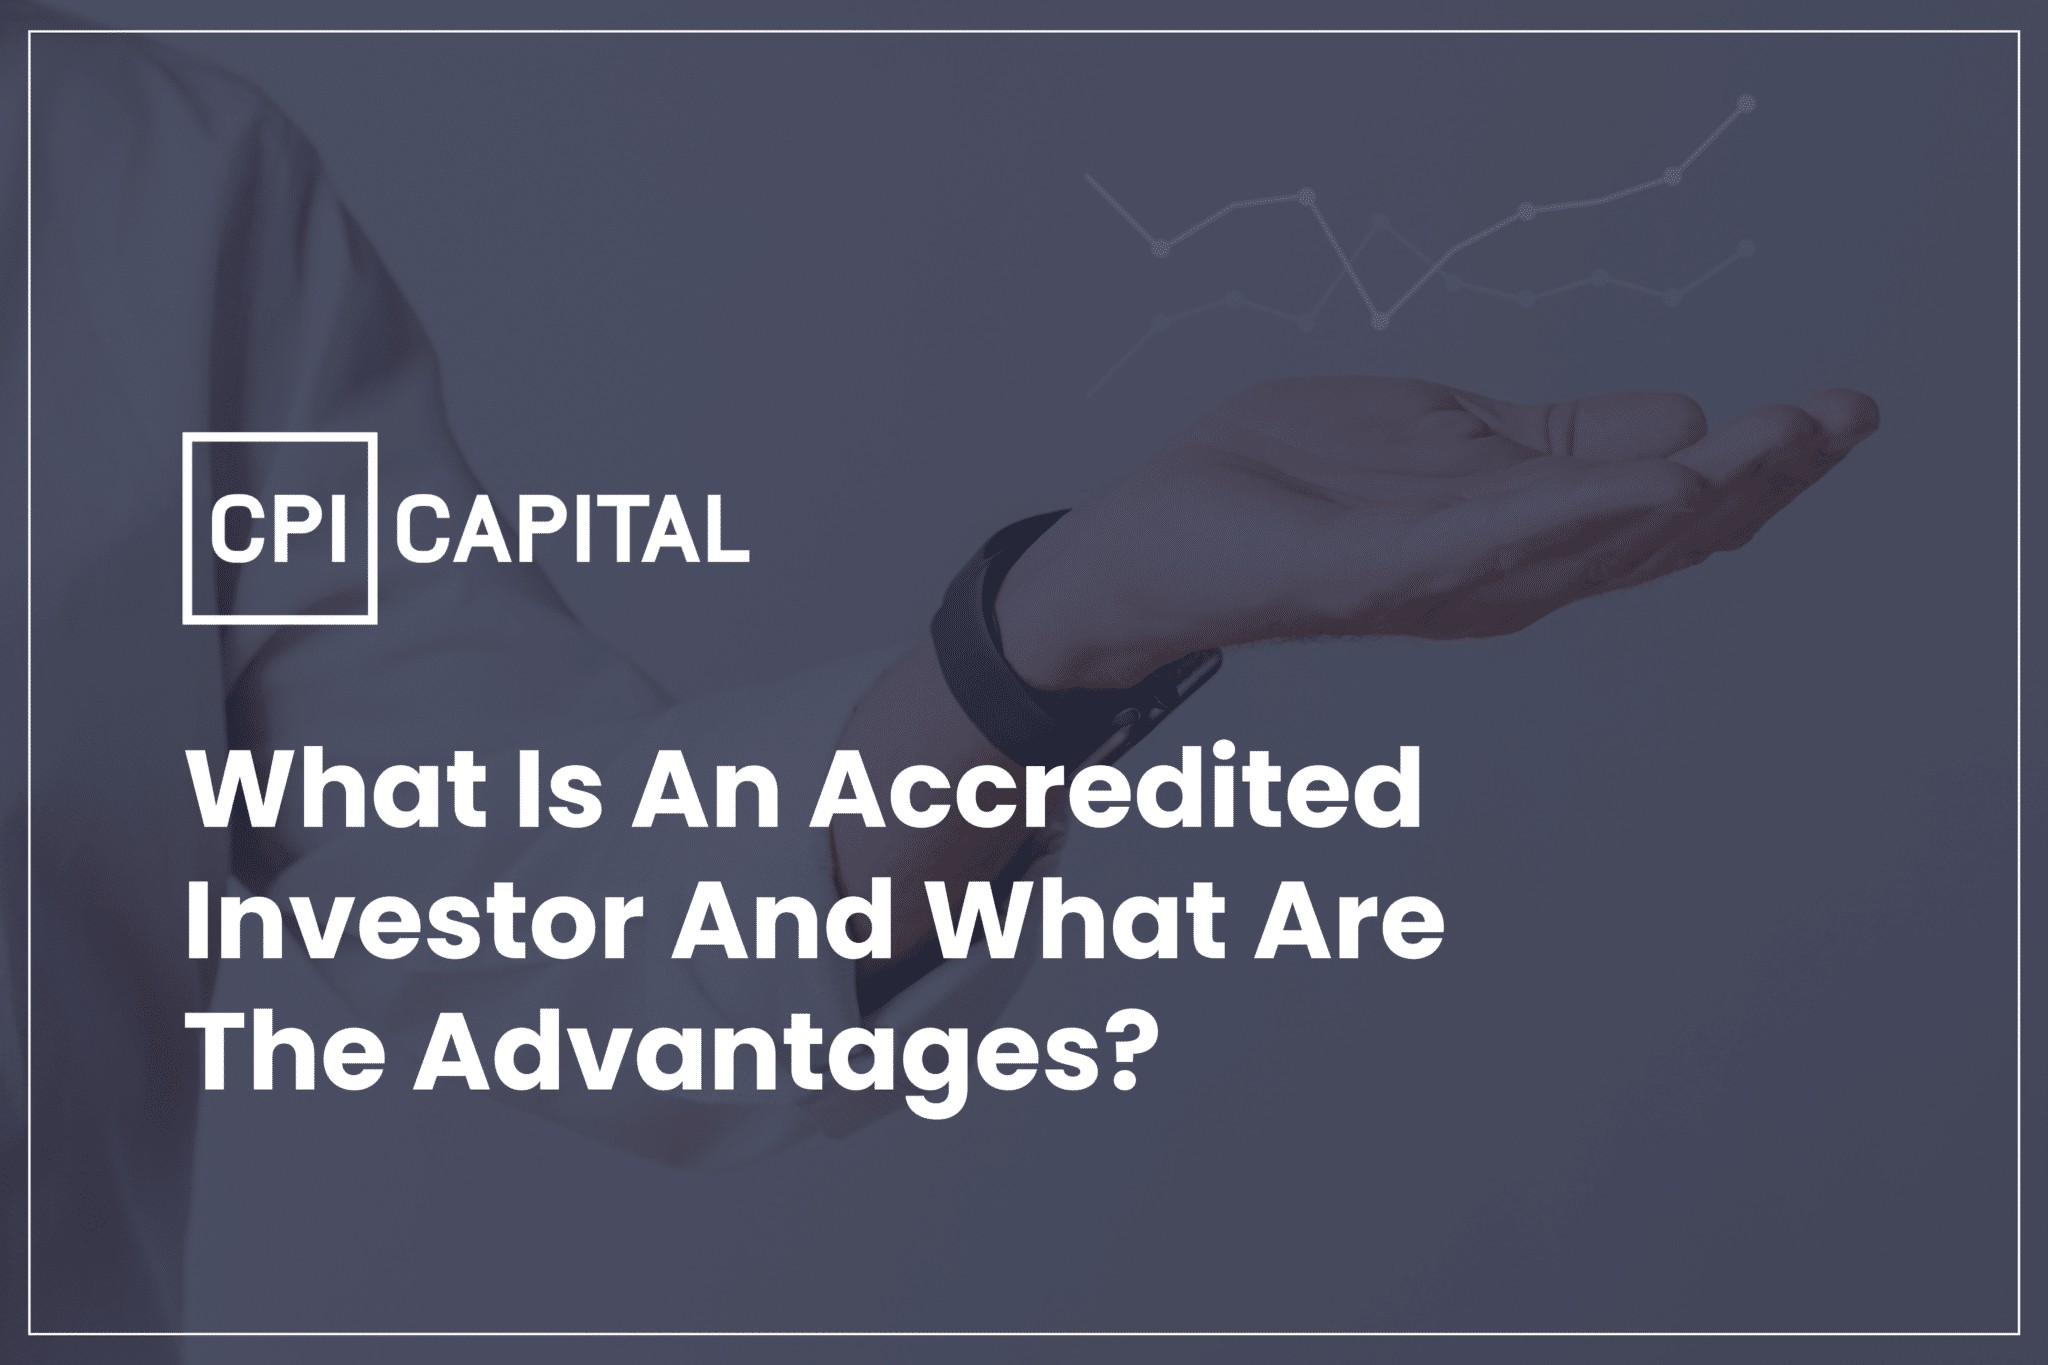 What is an Accredited Investor and what are the advantages?